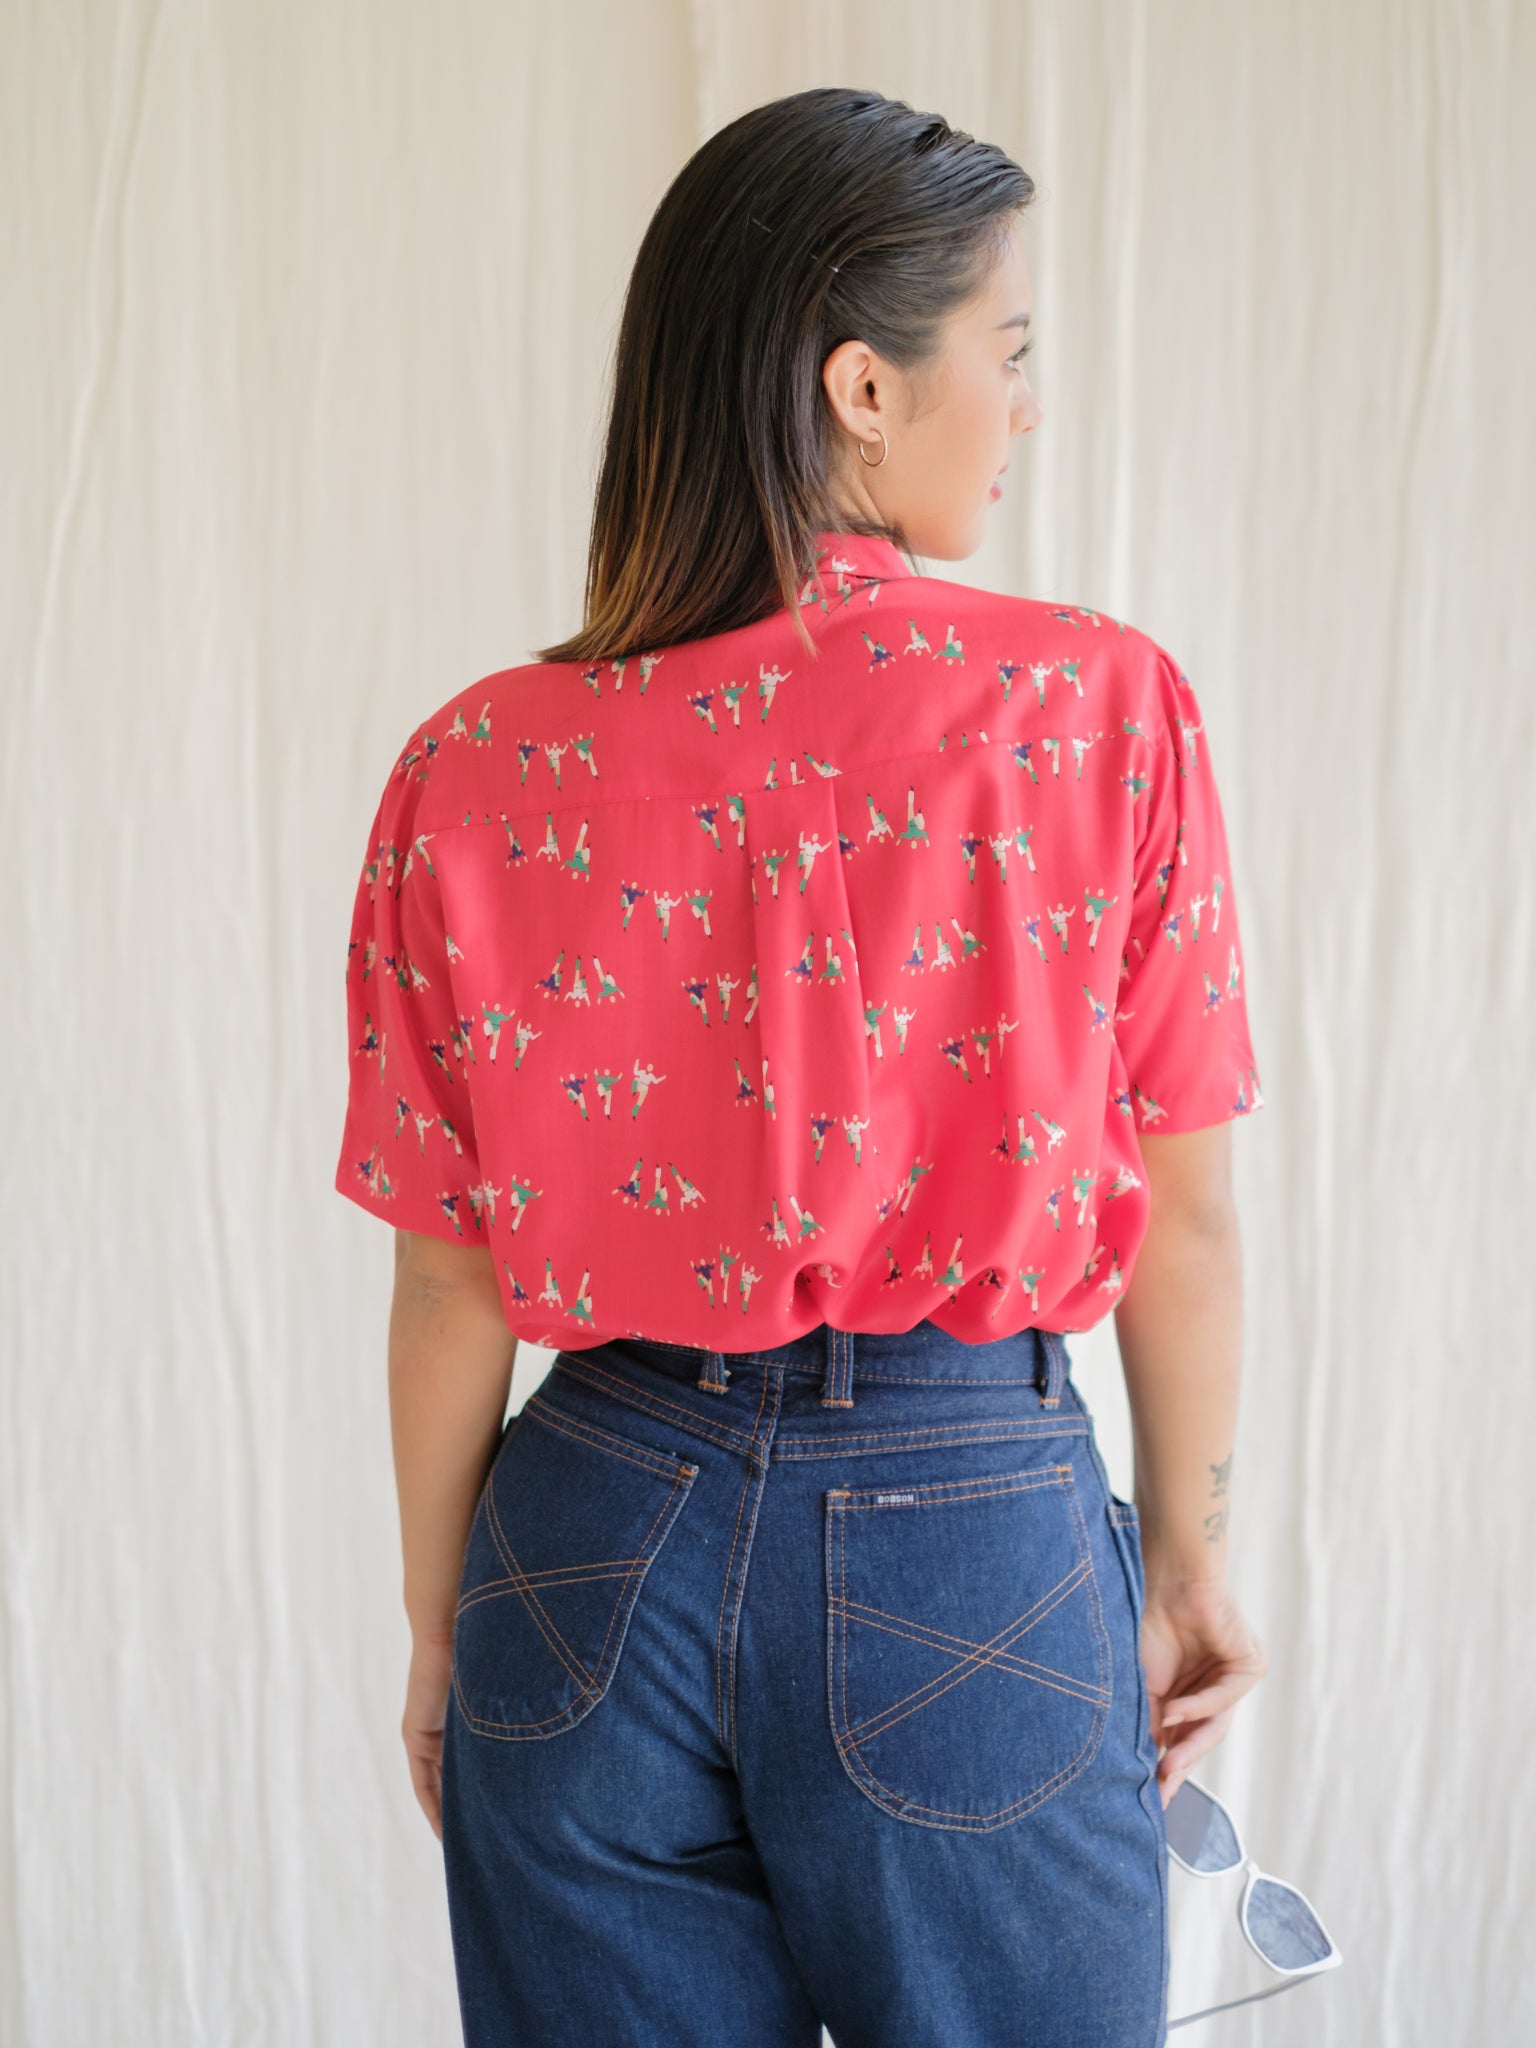 Red collared shirt vintage blouse